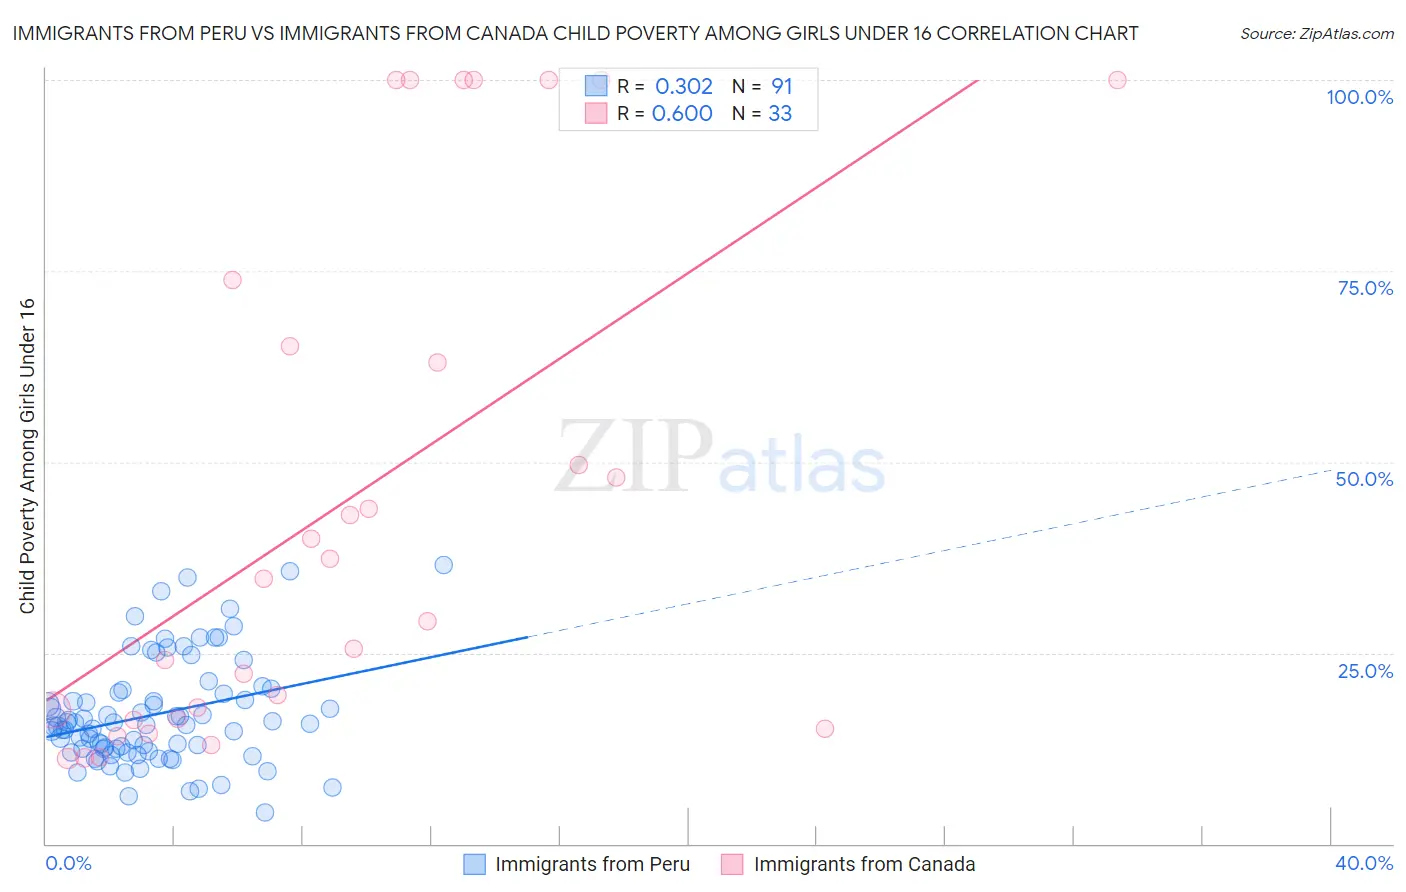 Immigrants from Peru vs Immigrants from Canada Child Poverty Among Girls Under 16